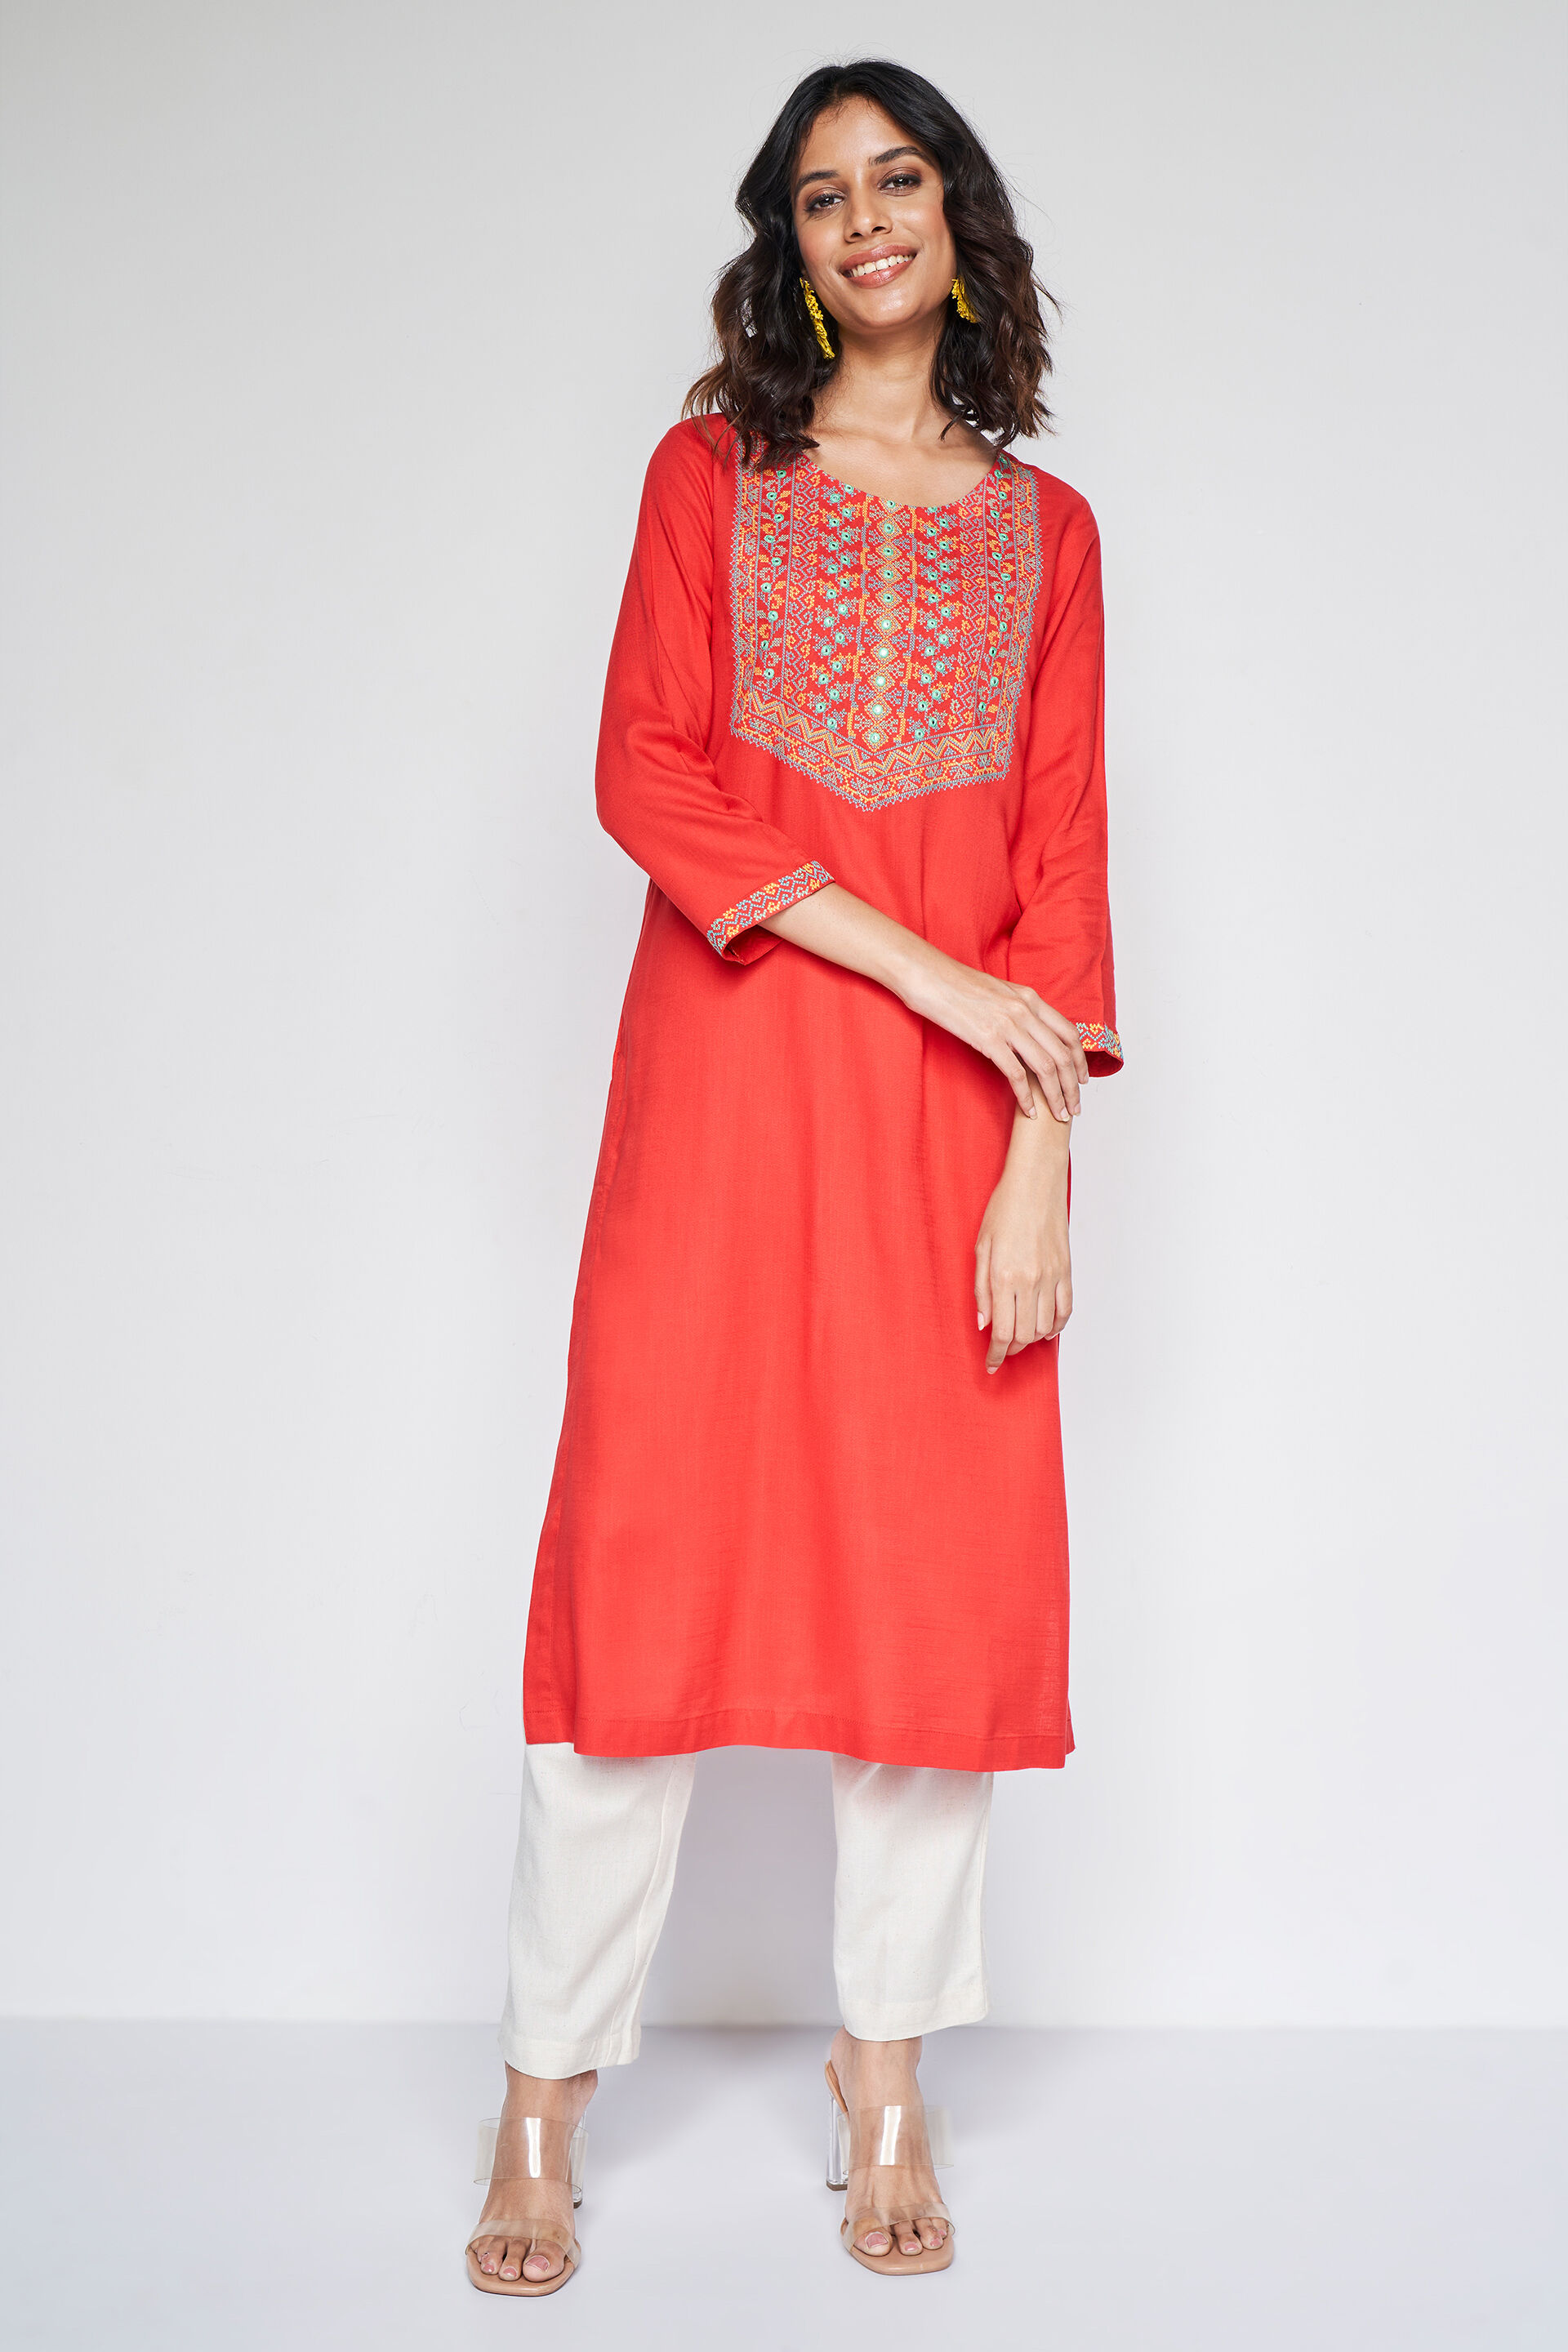 Collection Readymade Partyware Kurti at Rs 2999 in Surat | ID: 2850211304033